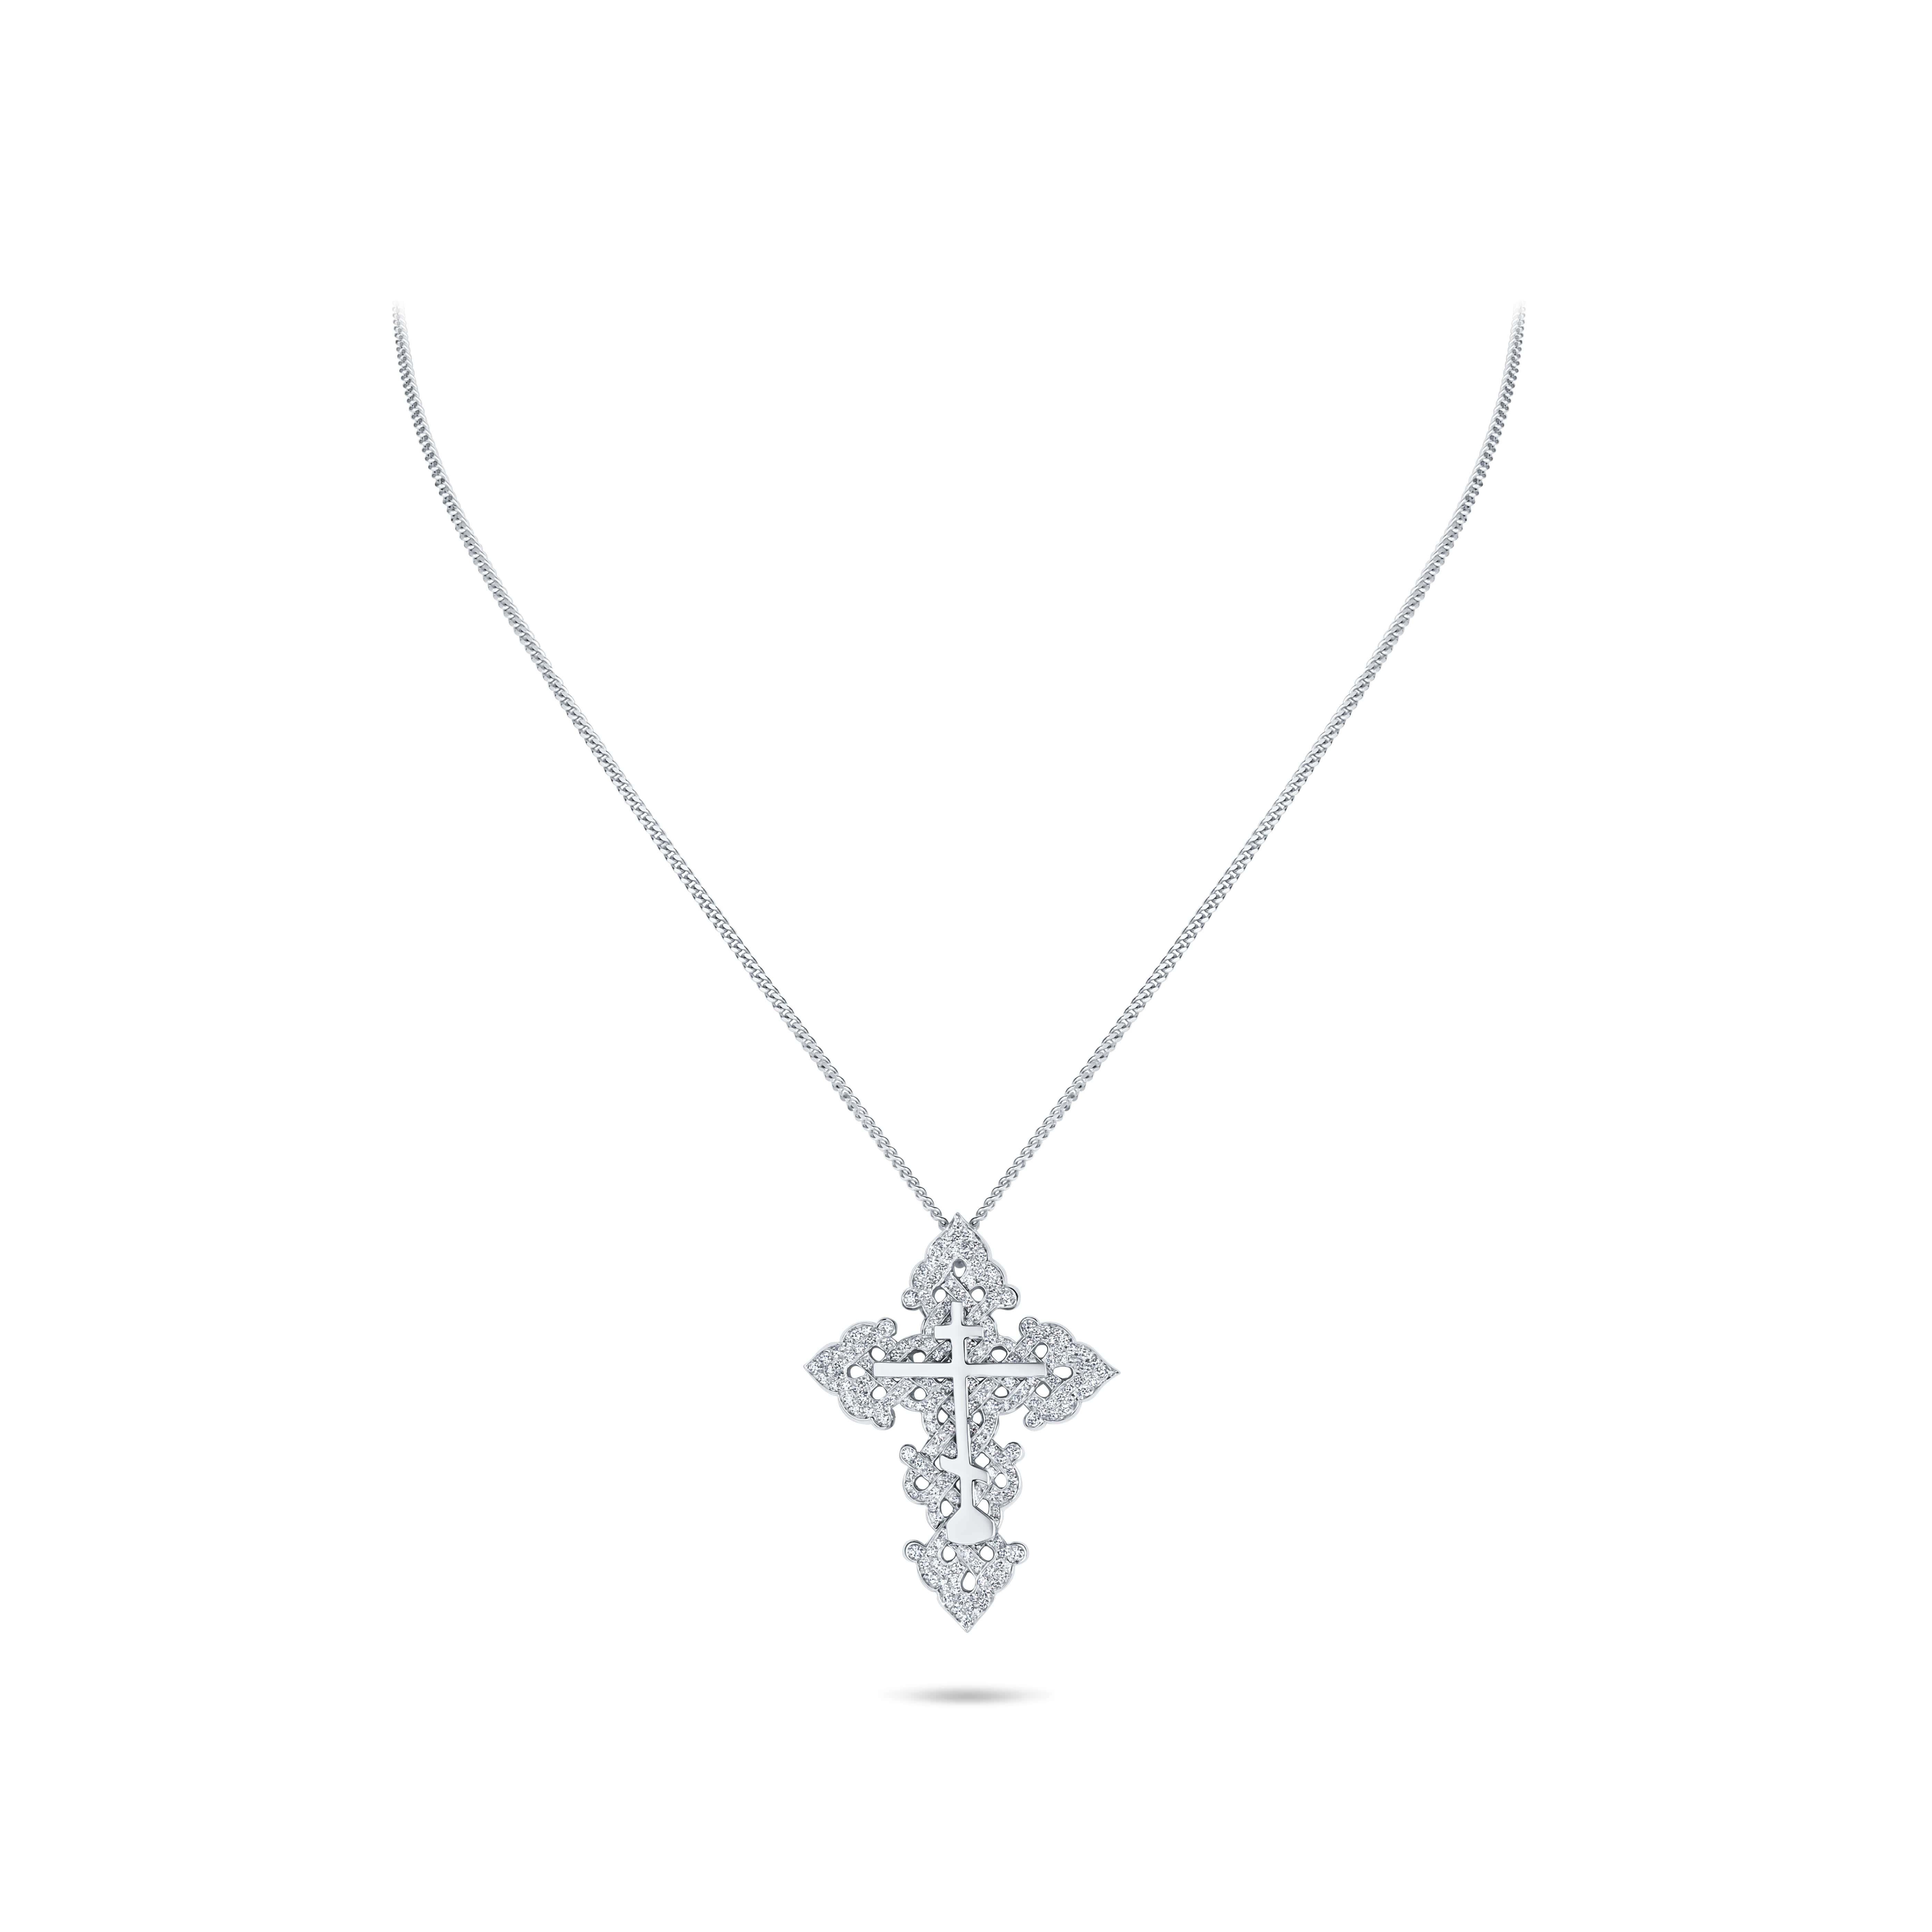 Experience the opulence of the David Morris-designed Diamond Ornate Cross Pendant, meticulously crafted in 18-carat white gold. A testament to refined elegance, this pendant necklace showcases an intricately designed cross, adorned with diamonds